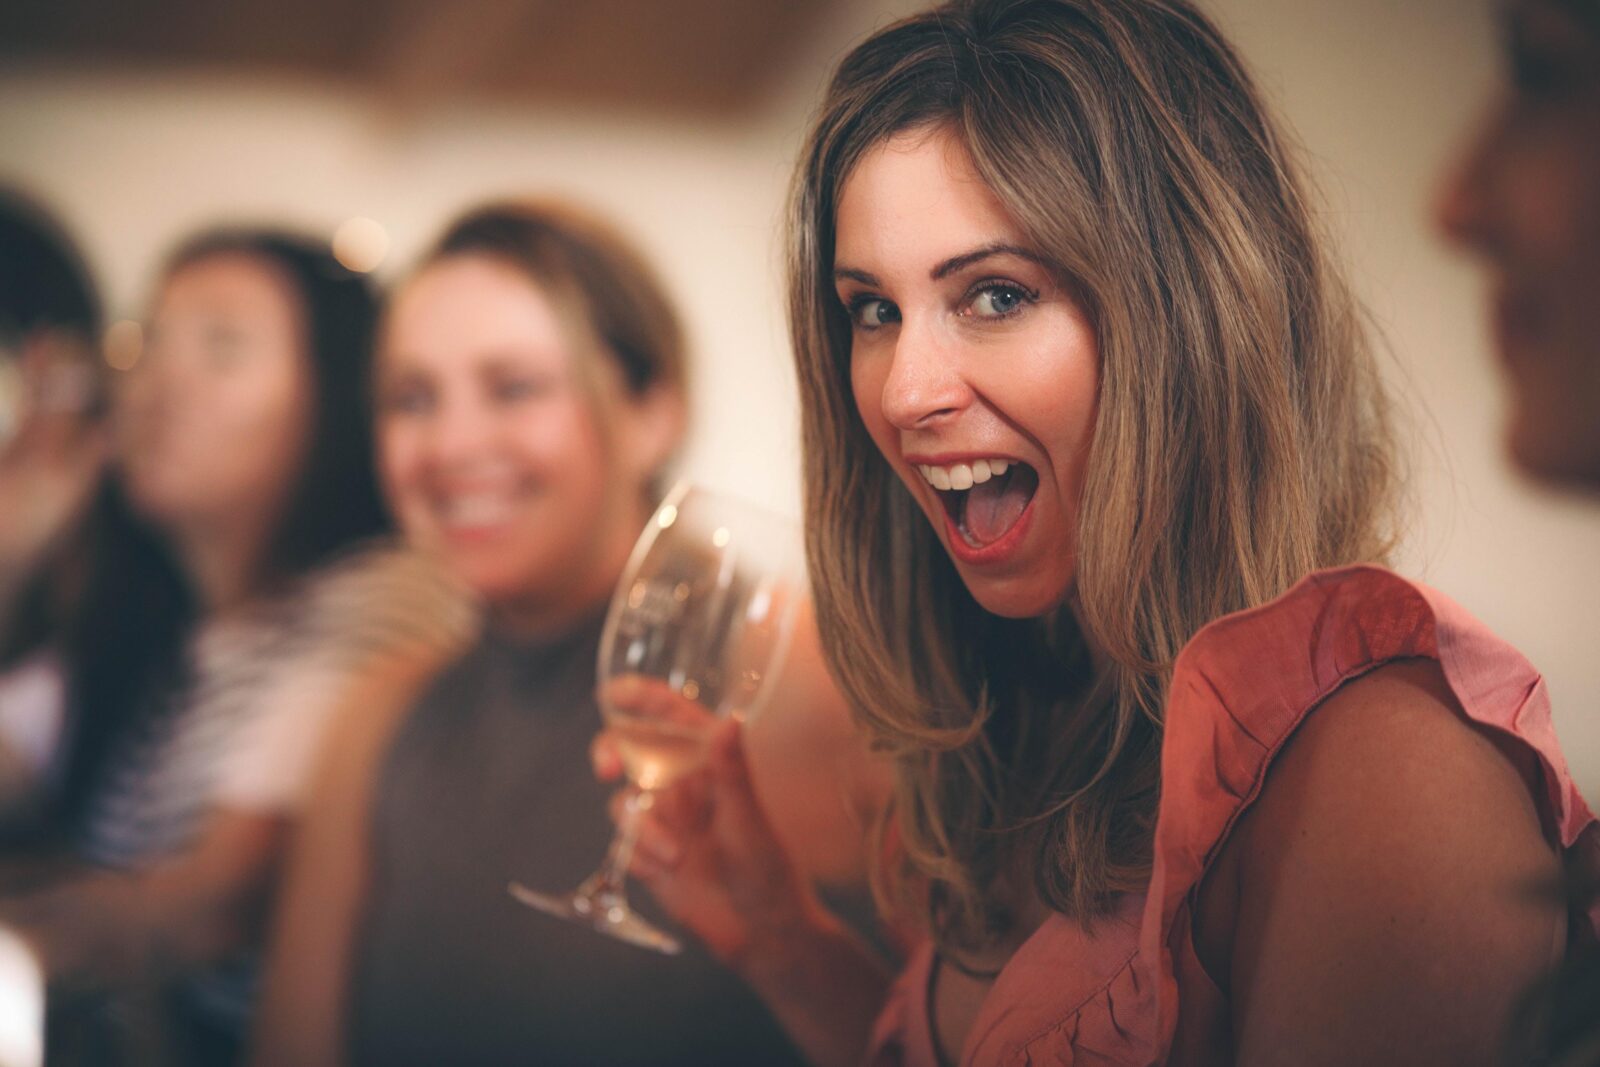 A lady holding a wine glass smiling at the camera